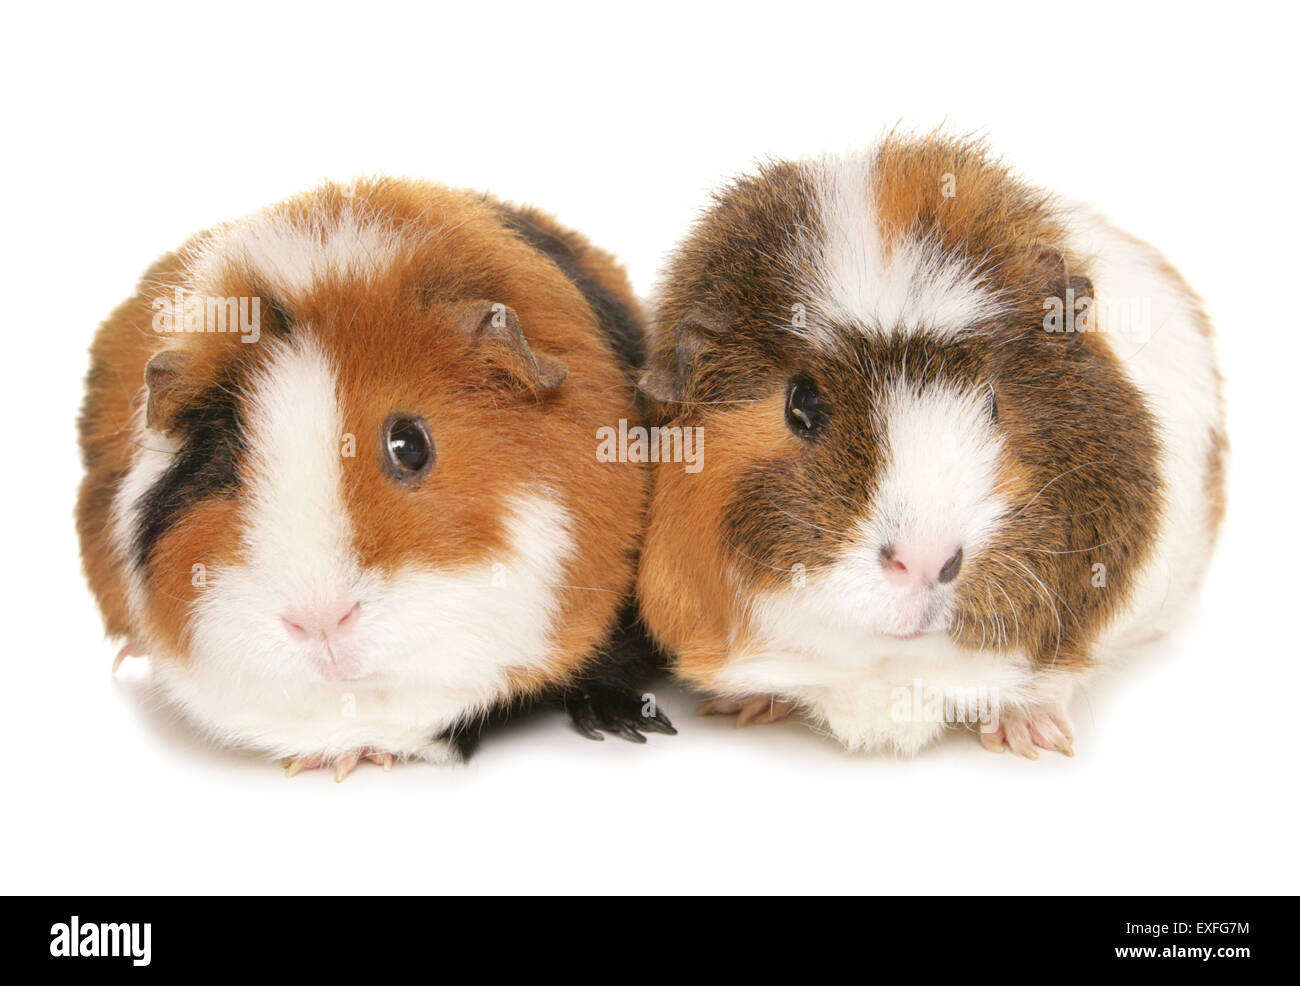 Guinea pigs Two adults in a studio Stock Photo